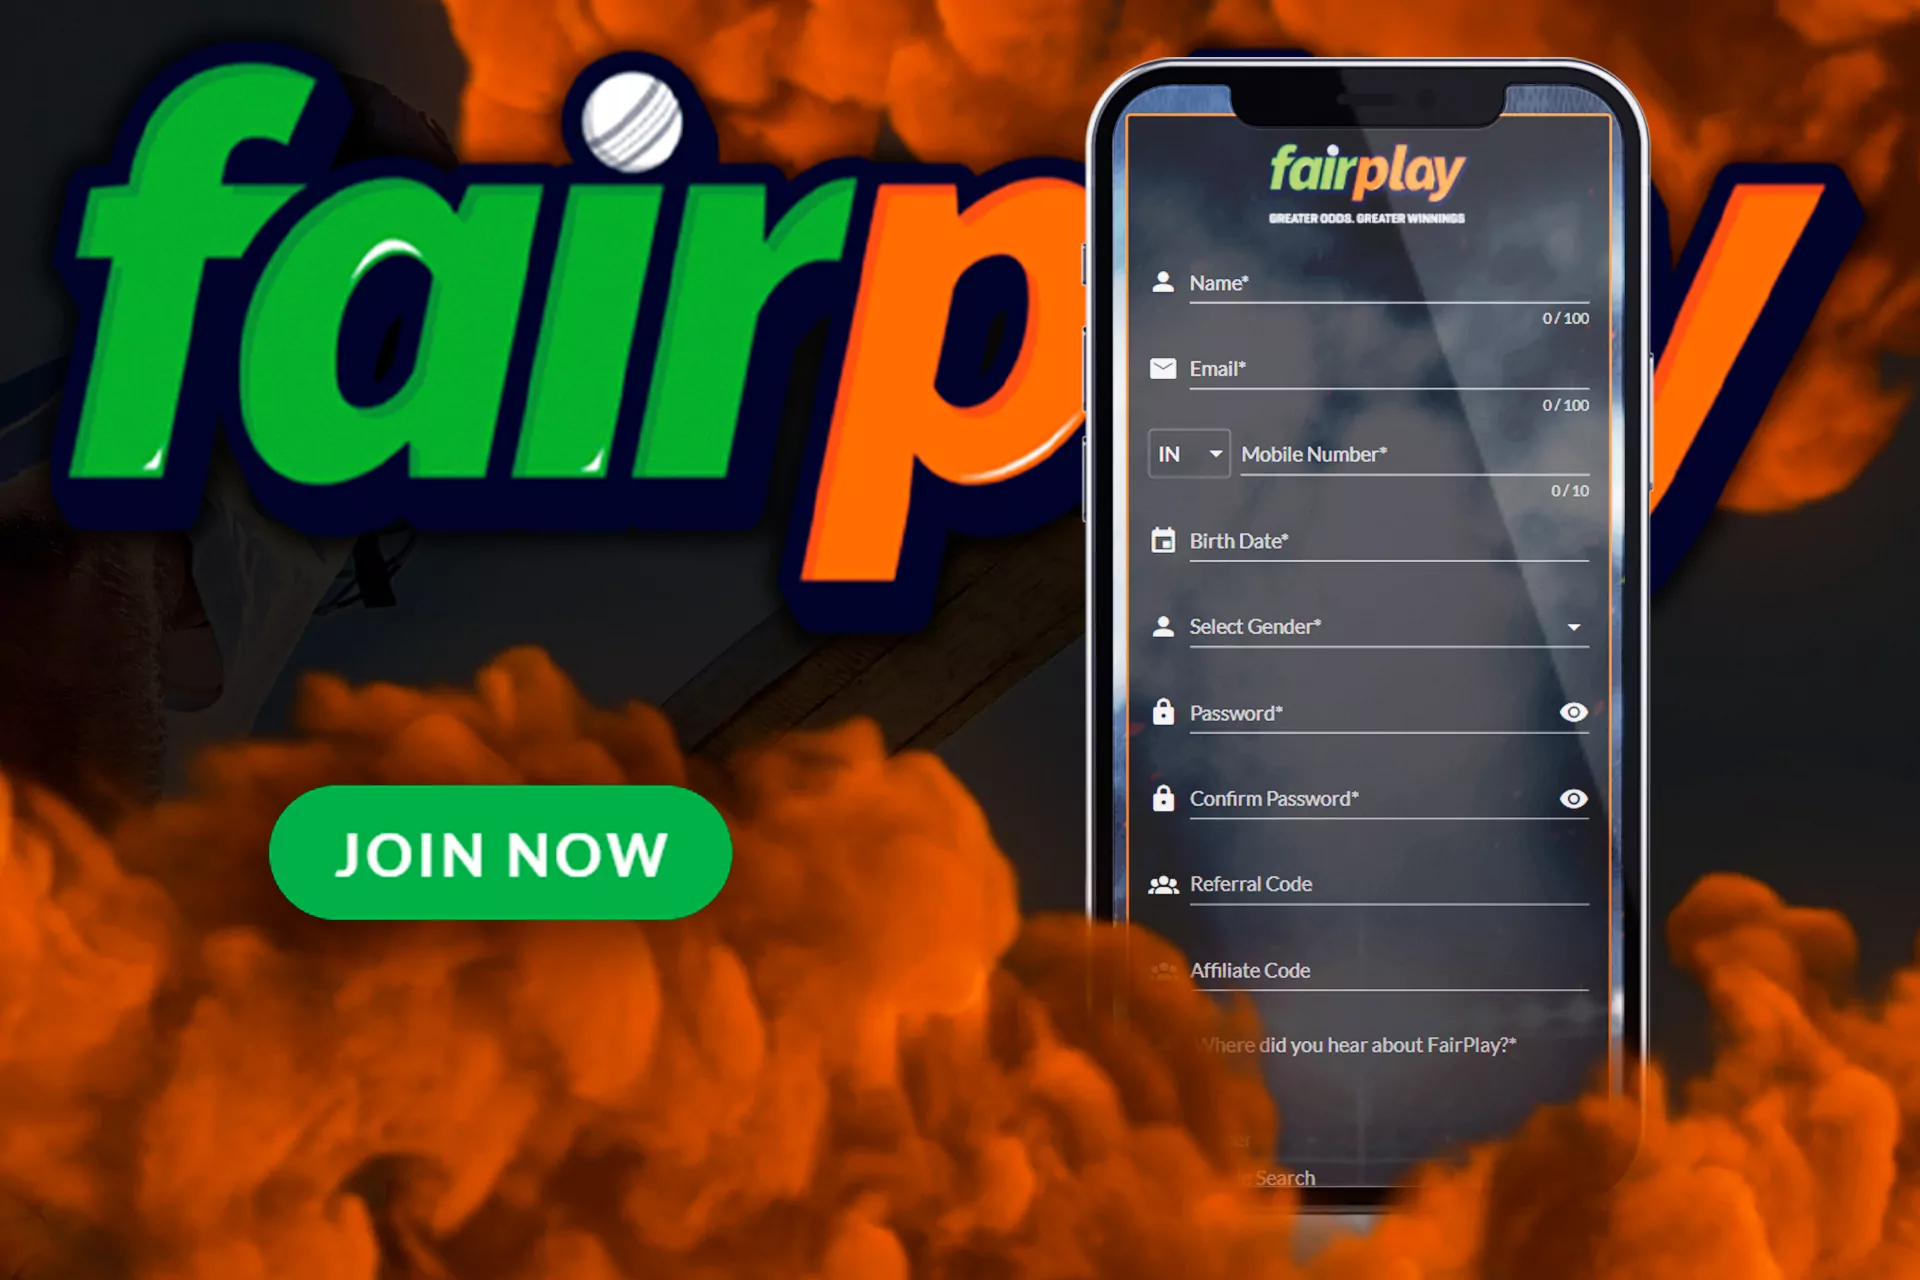 Run the app, and create an account to start betting on Fairplay.